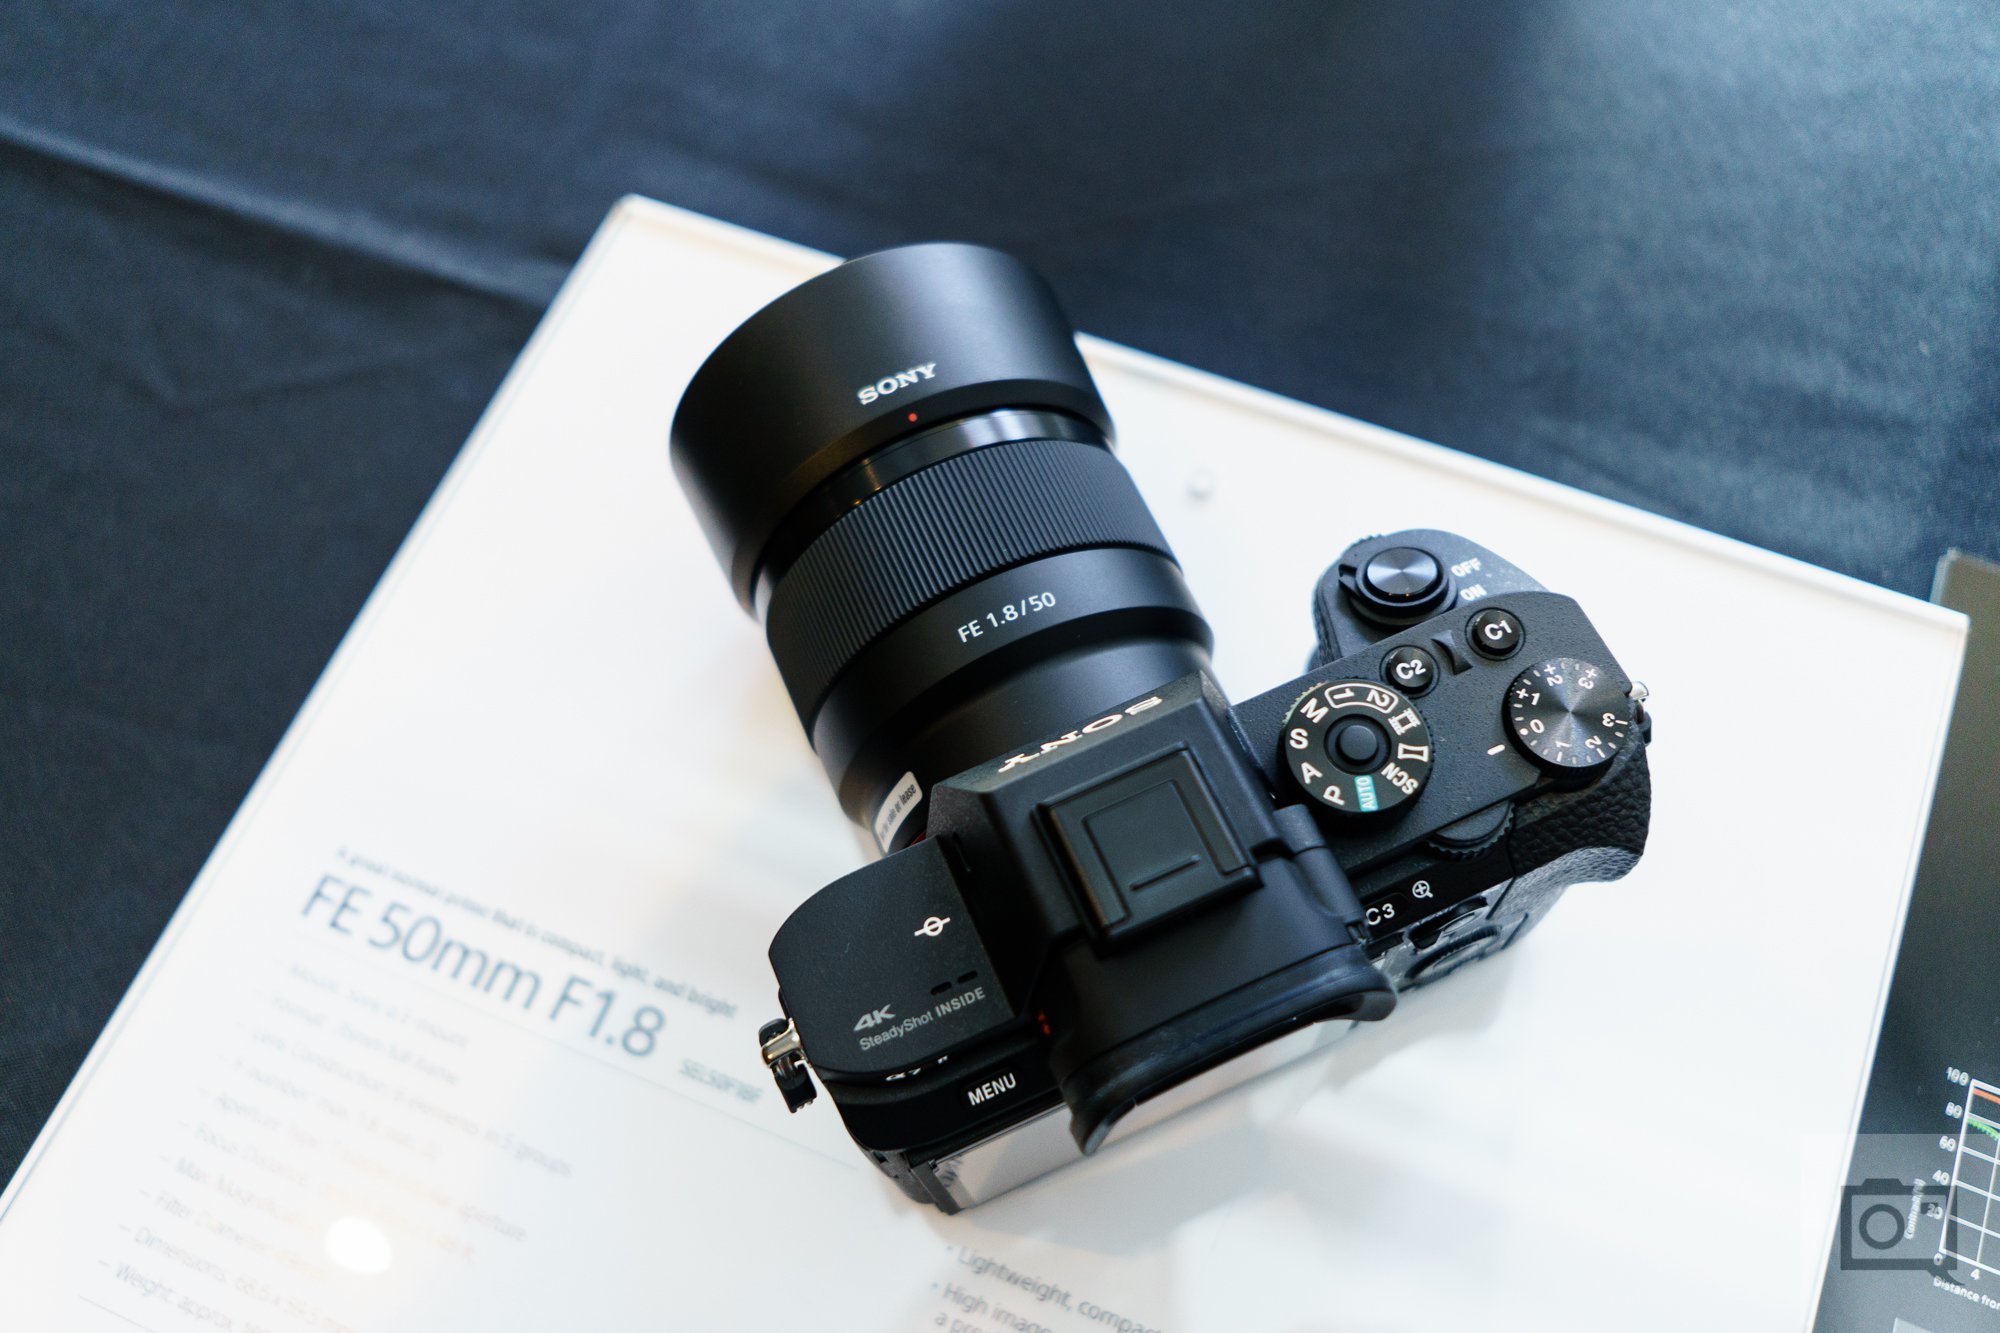 Sony FE 50mm f/1.8 Lens Announced, Price $248, Available for Pre-order